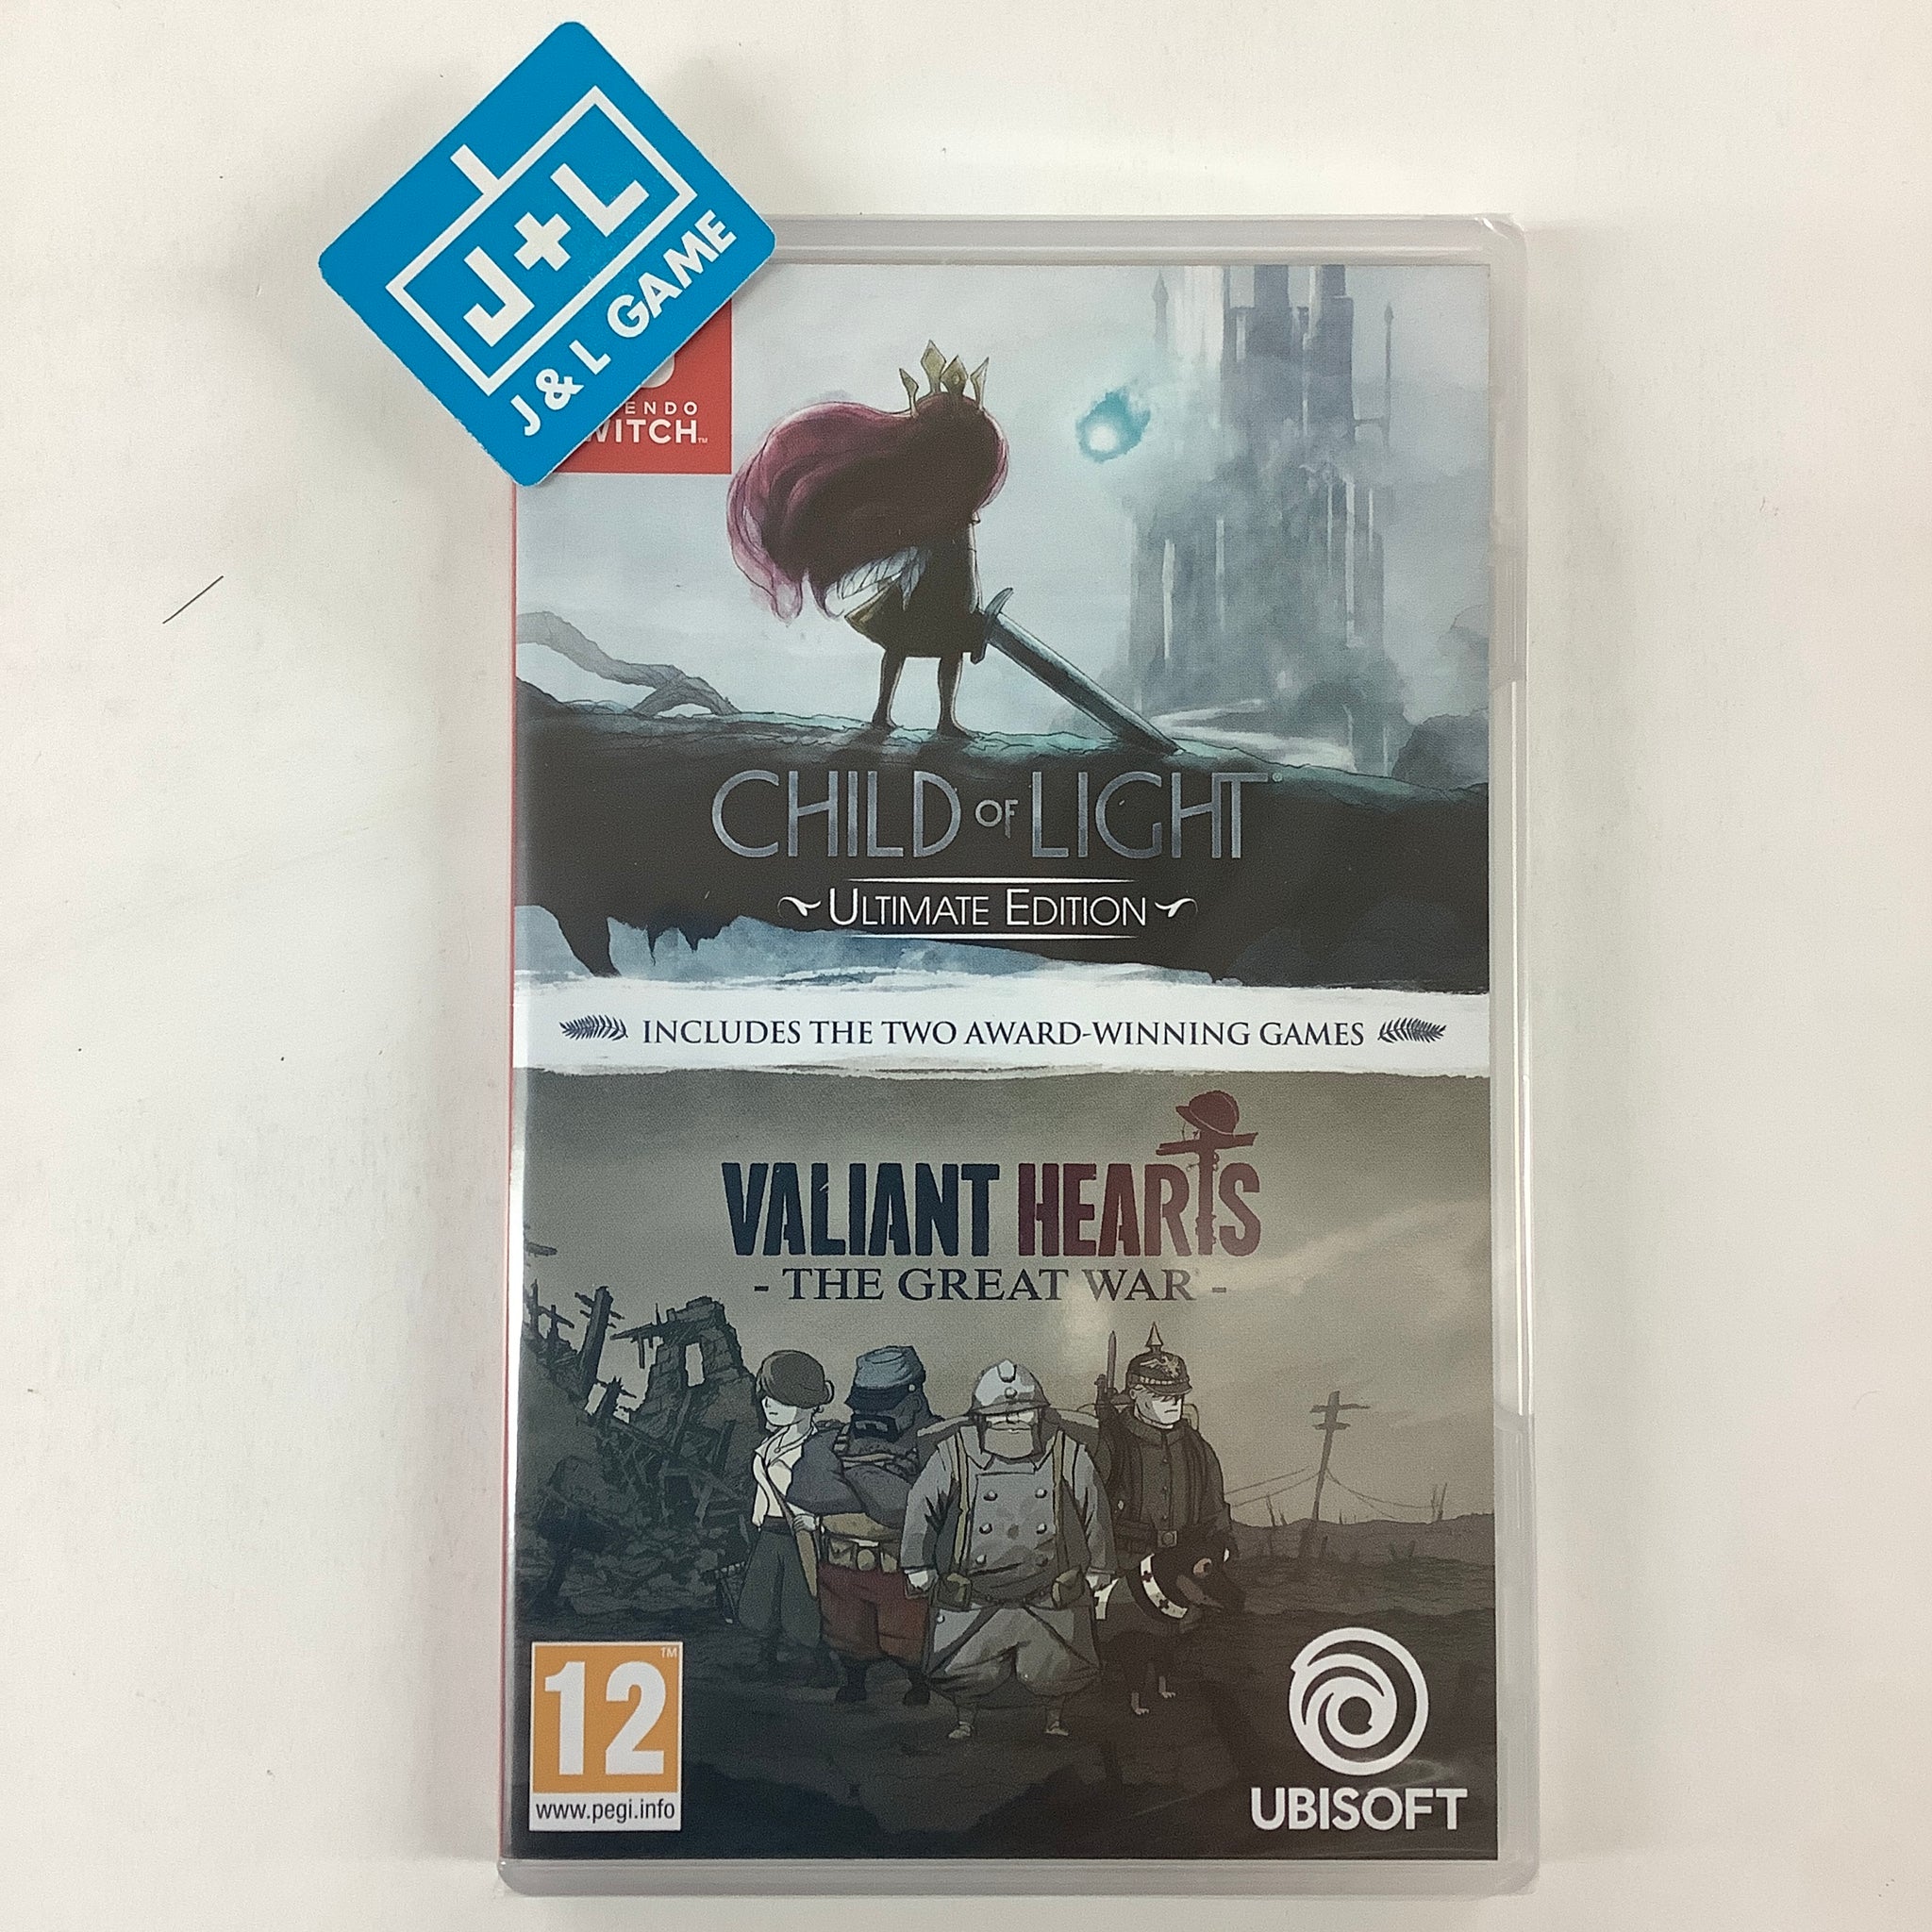 Child of Light Ultimate Edition + Valiant Hearts: The Great War - (NSW) Nintendo Switch (European Import) Video Games Ubisoft   